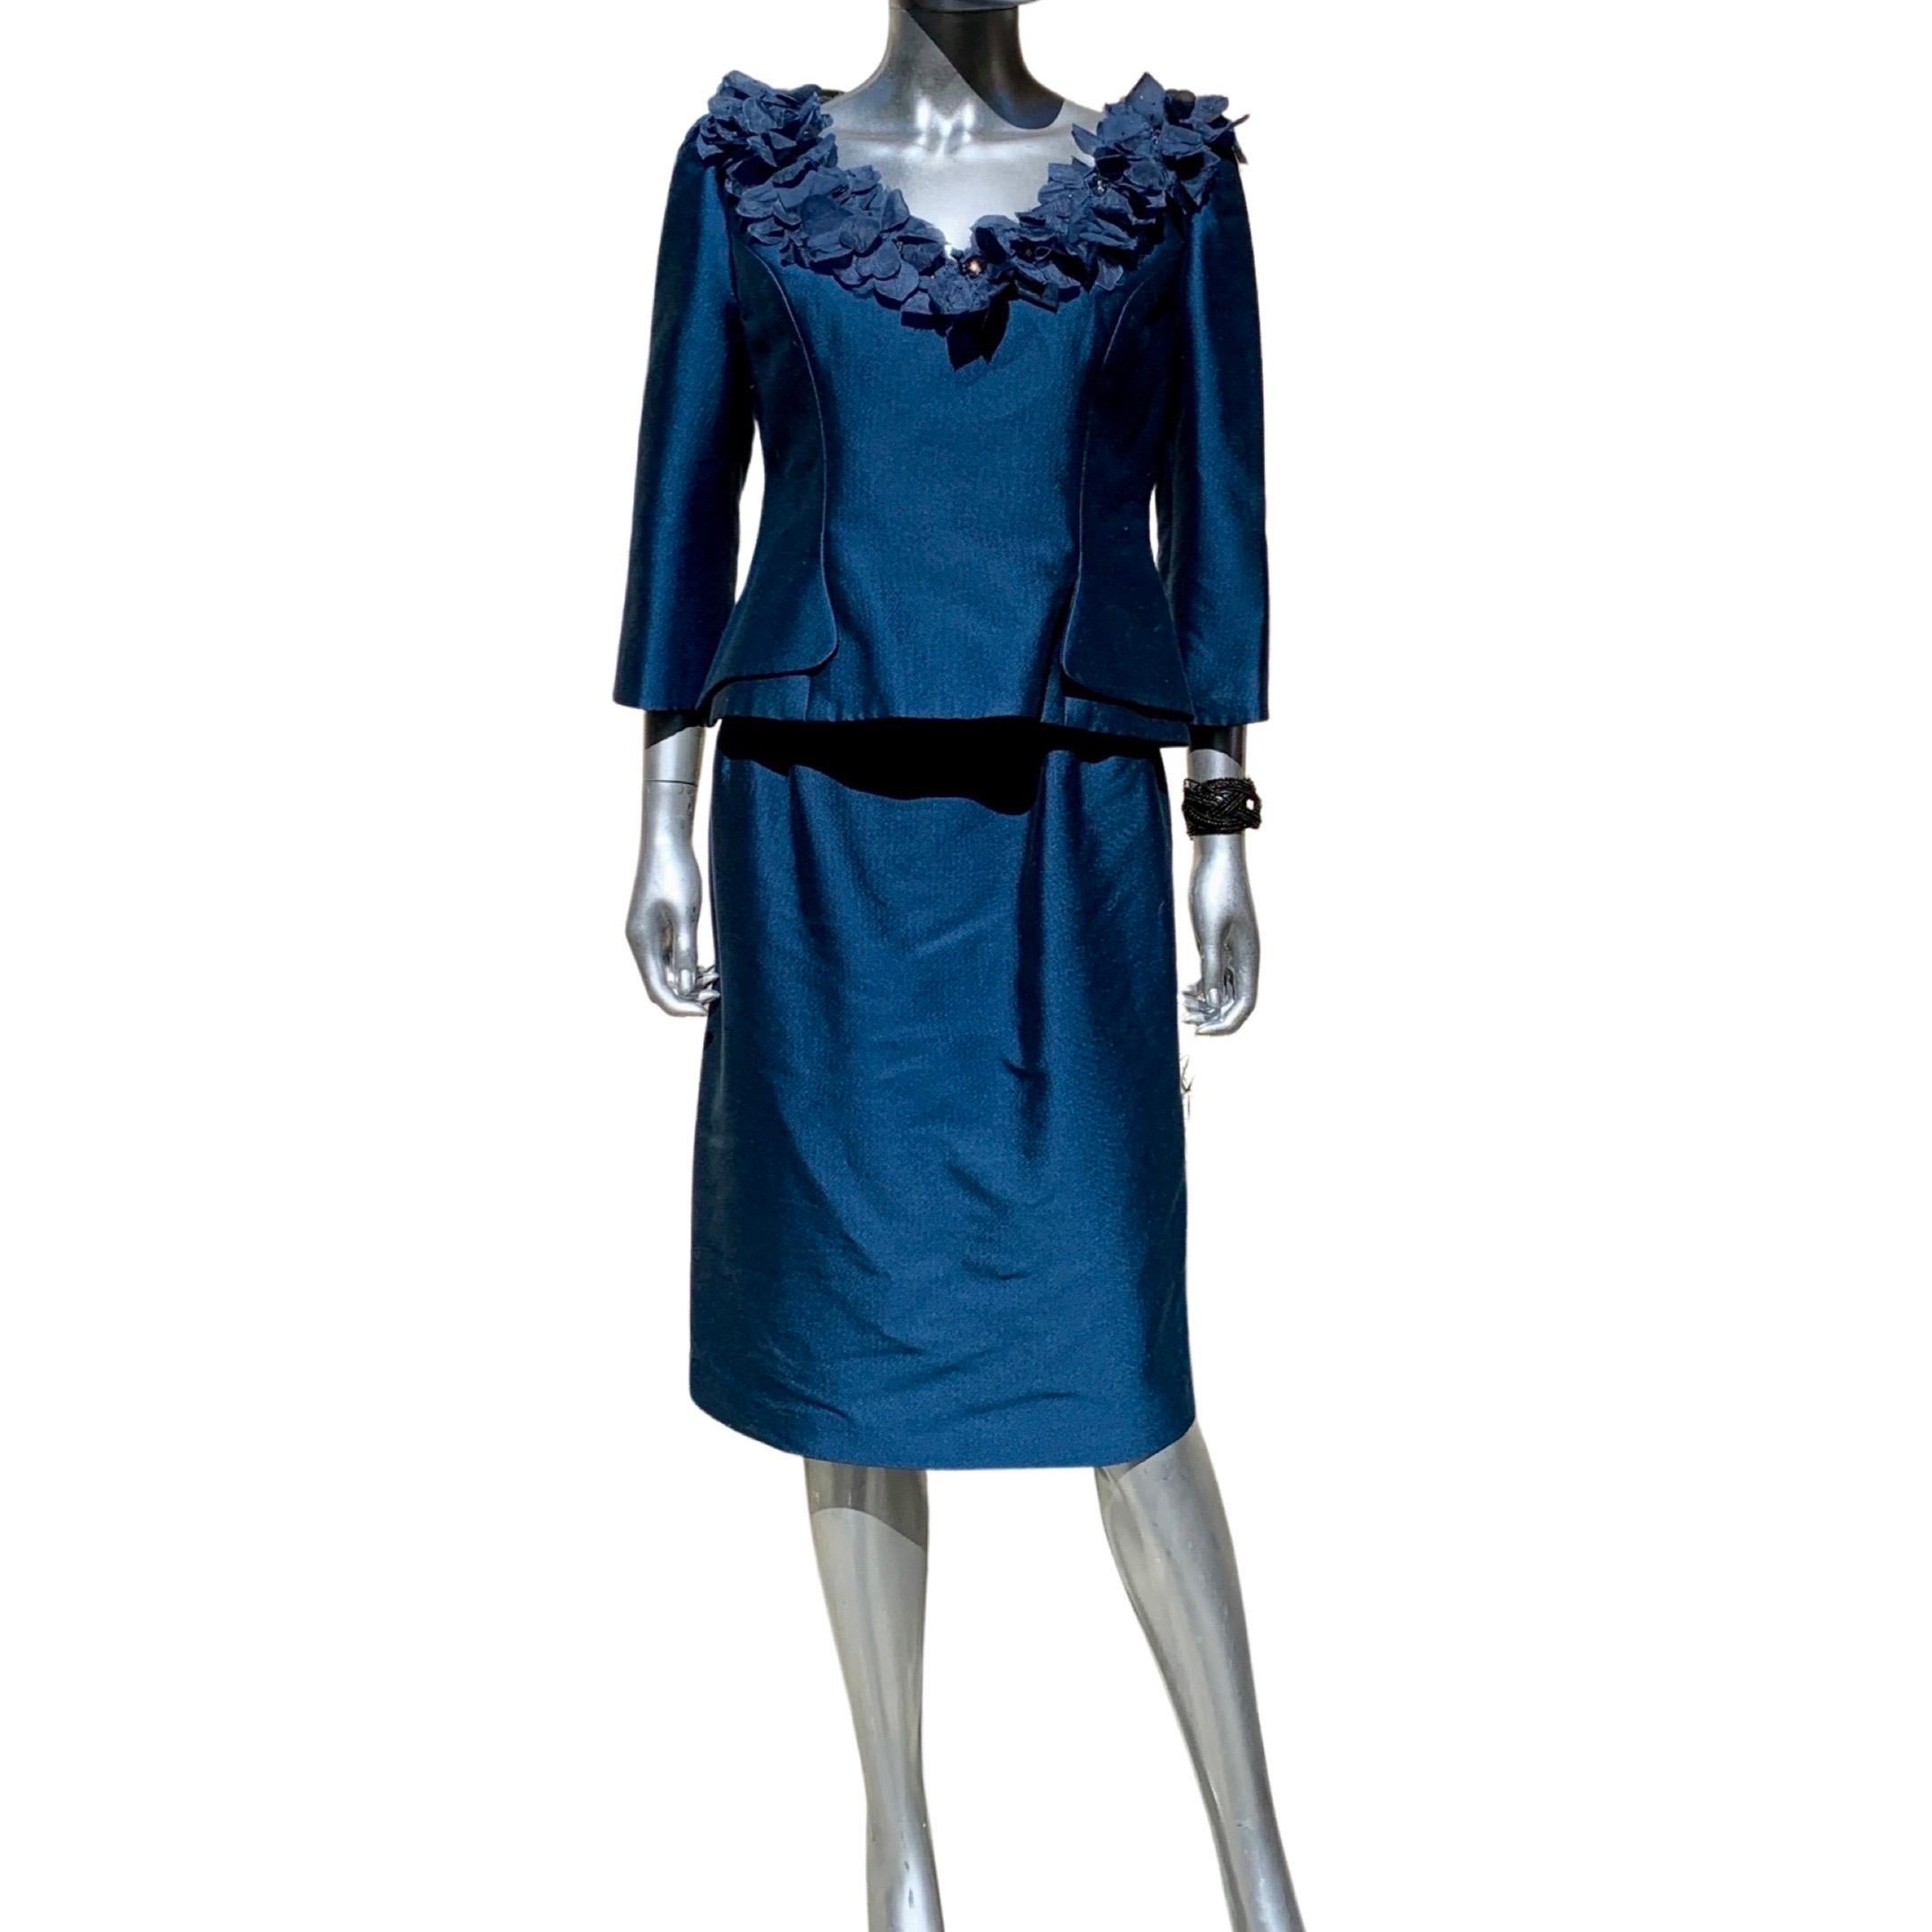 Women's Three Piece Saphire Blue Couture Evening Ensemble by Lily Samii SF Size 8 For Sale